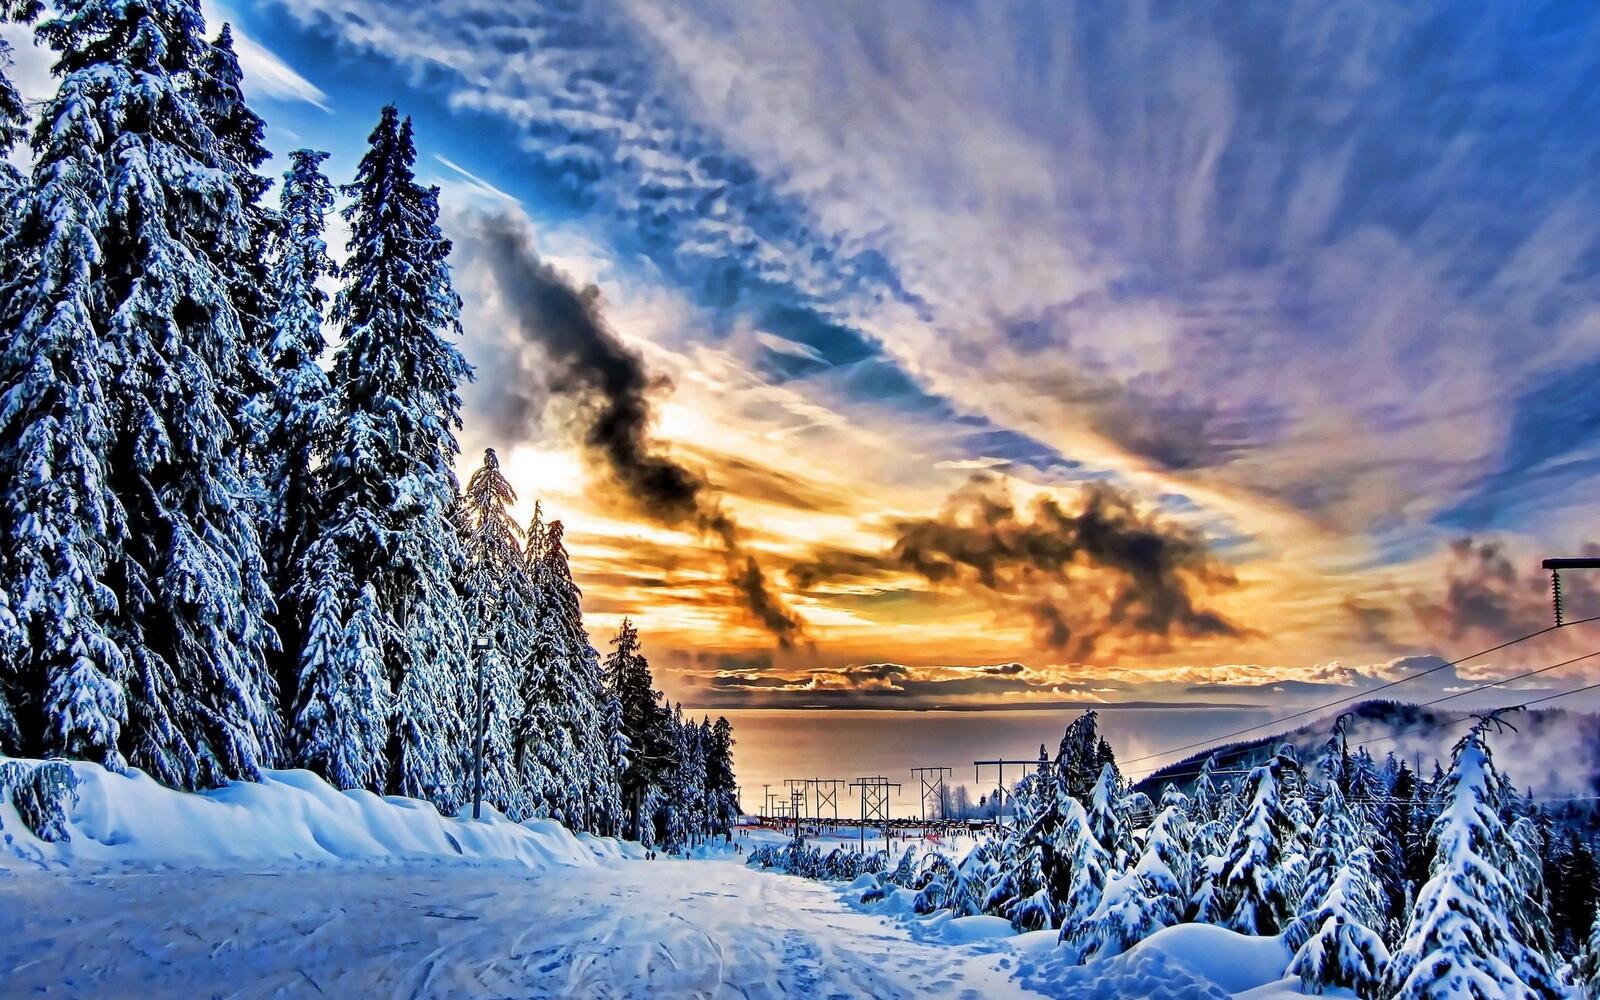 Wallpapers snow landscape beautifully on the desktop